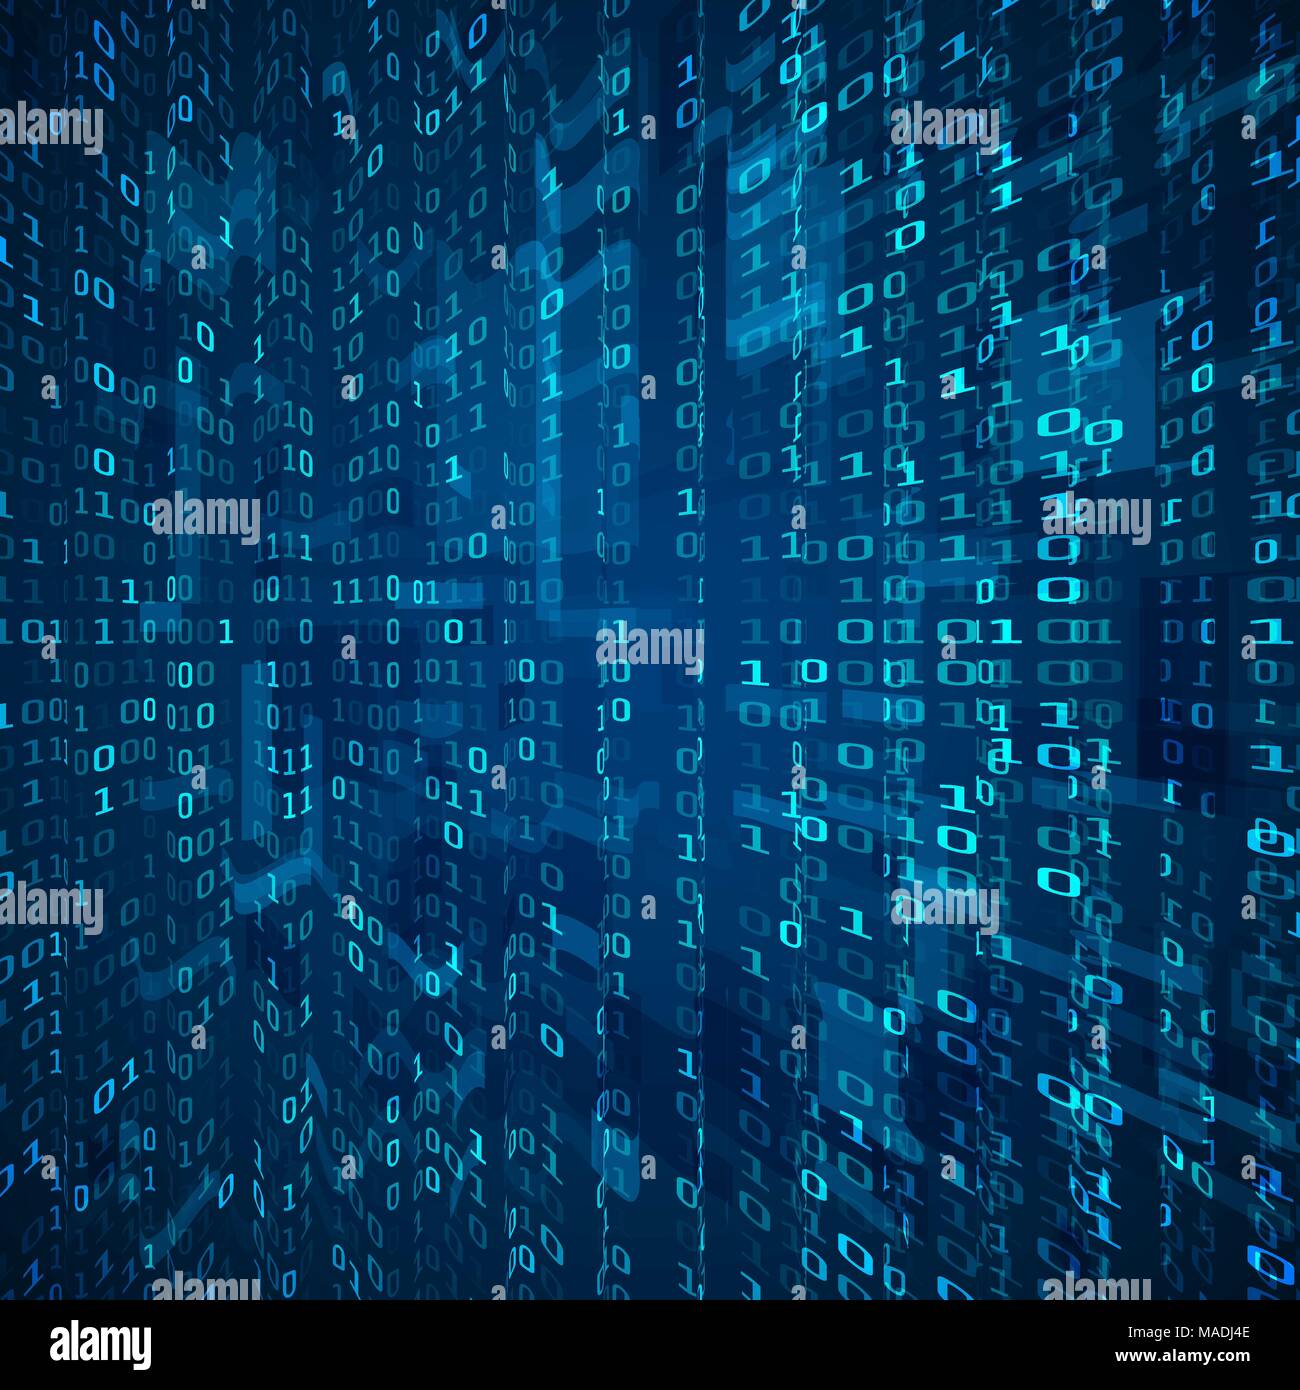 Download wallpaper background, code, binary, programming, section